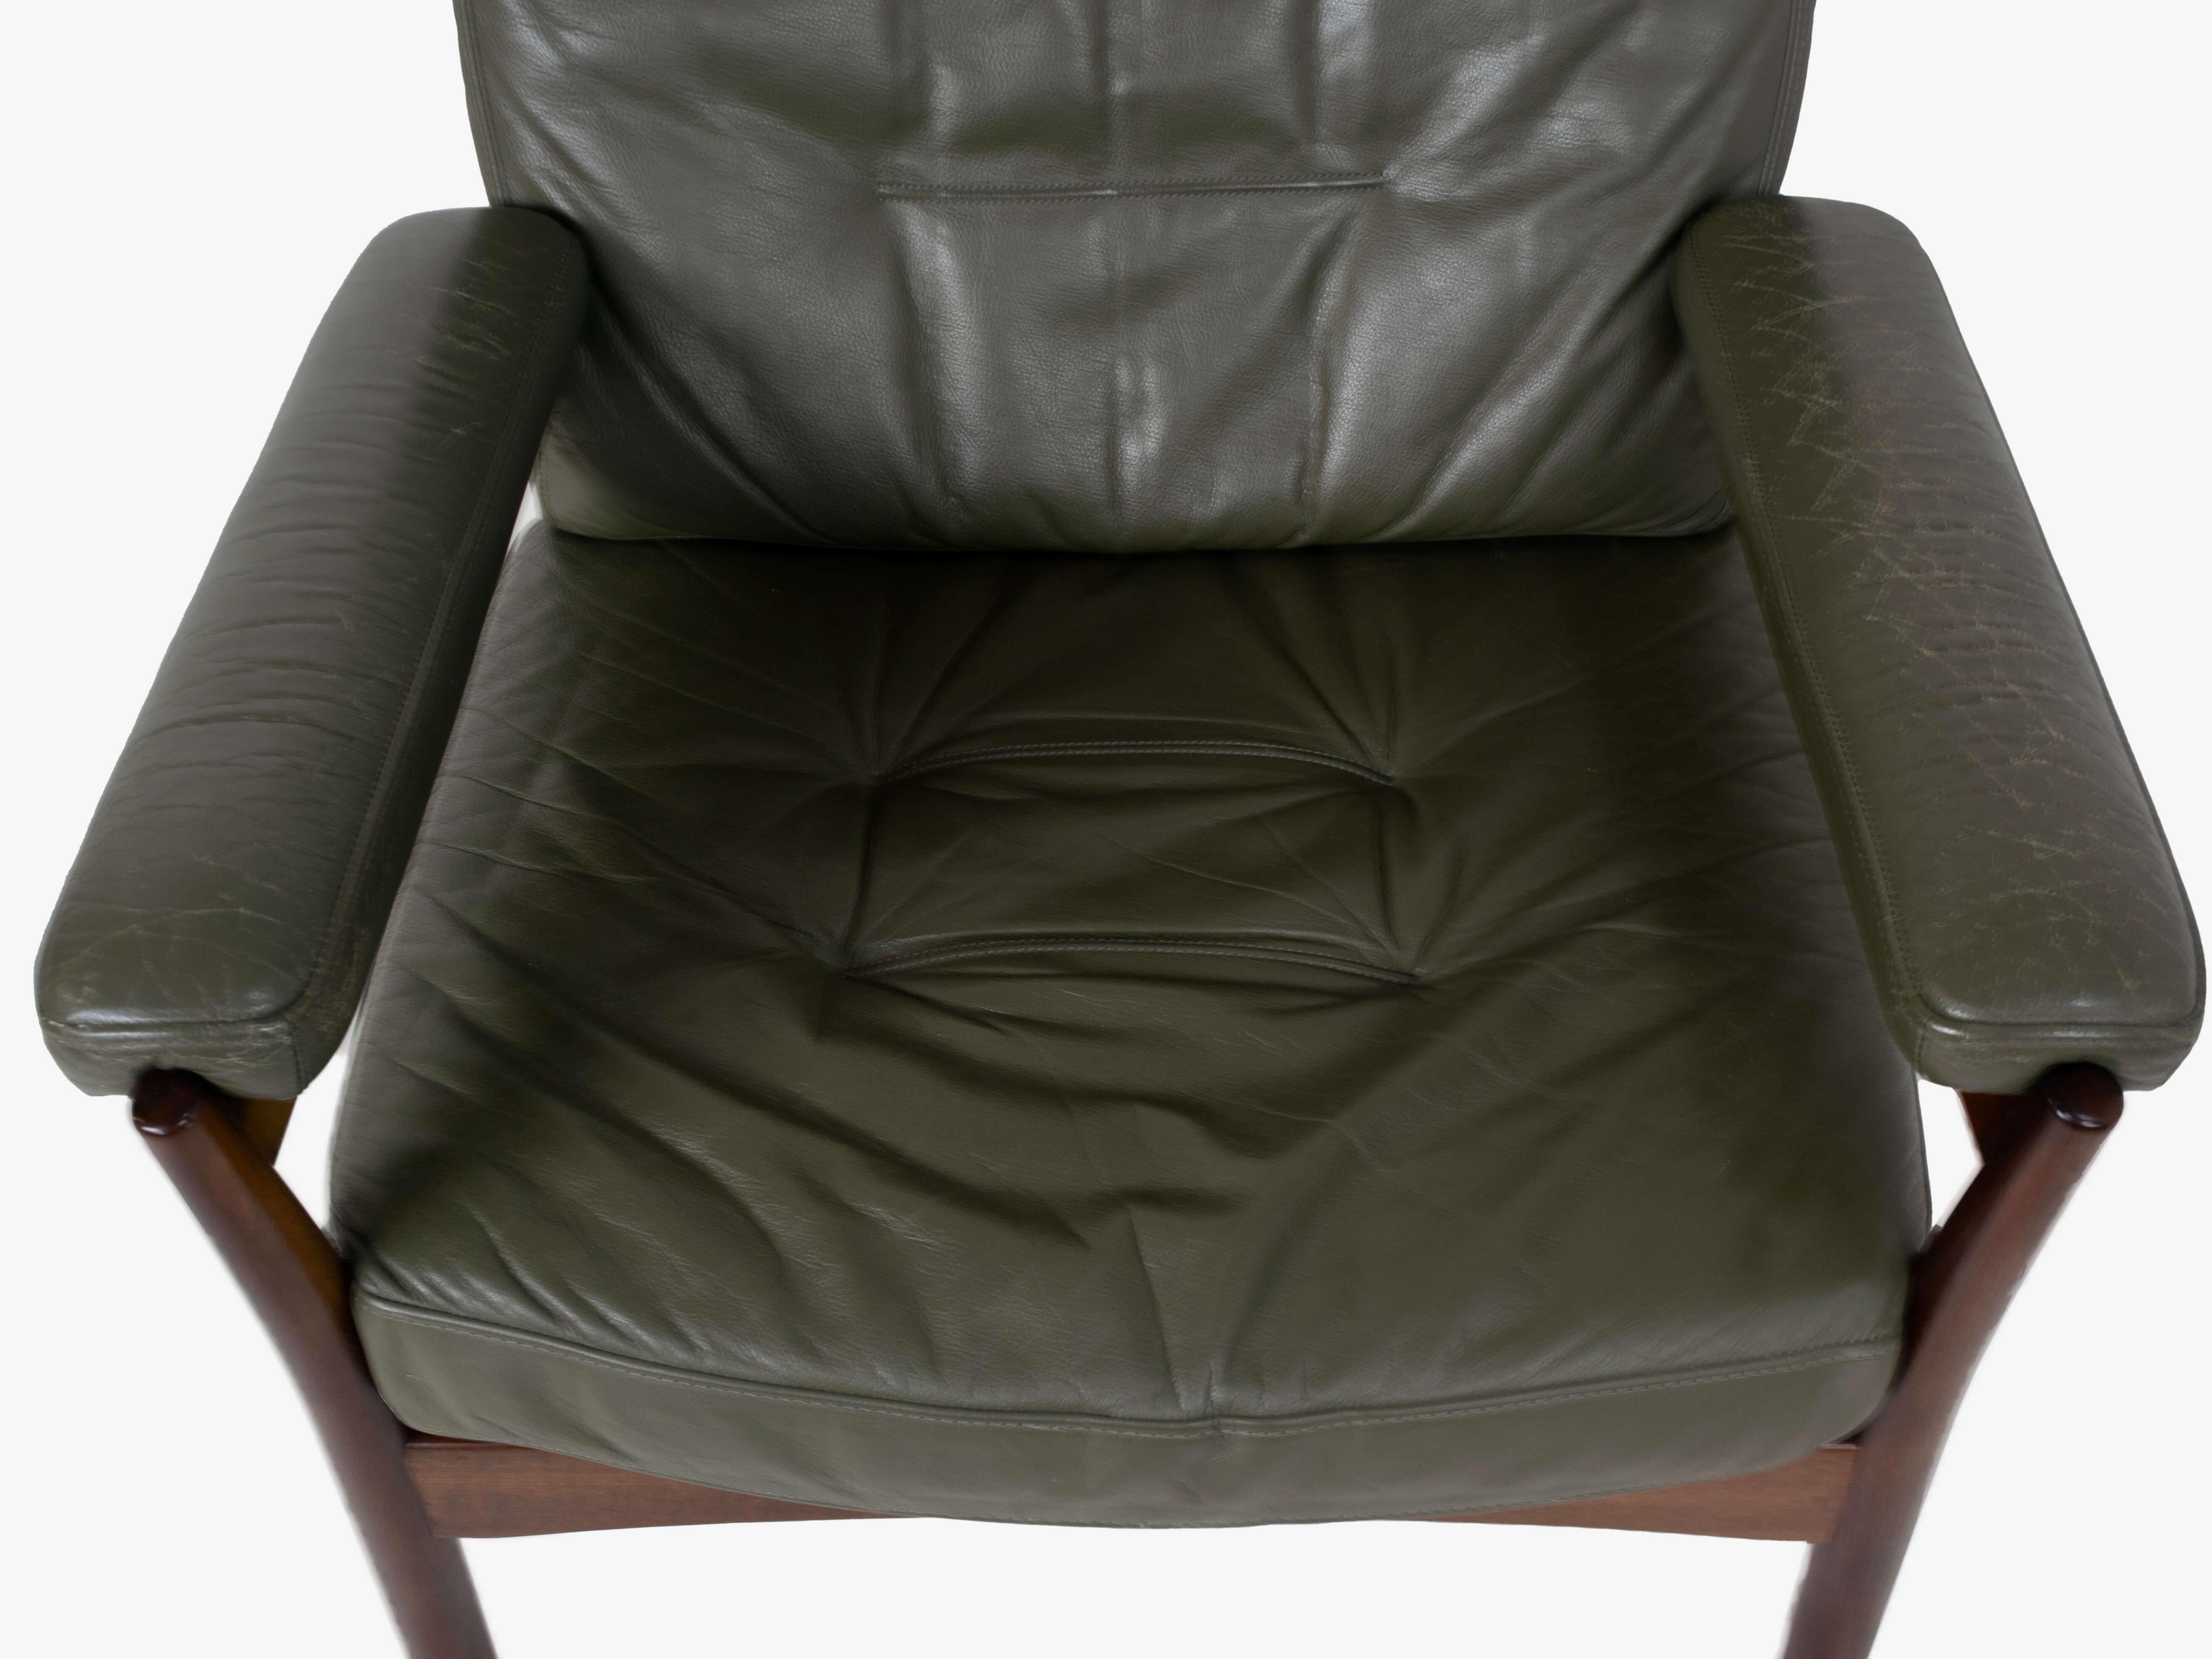 Late 20th Century G-Mobel Easy Chair in Green Leather for Göte Möbler, Sweden, 1970s